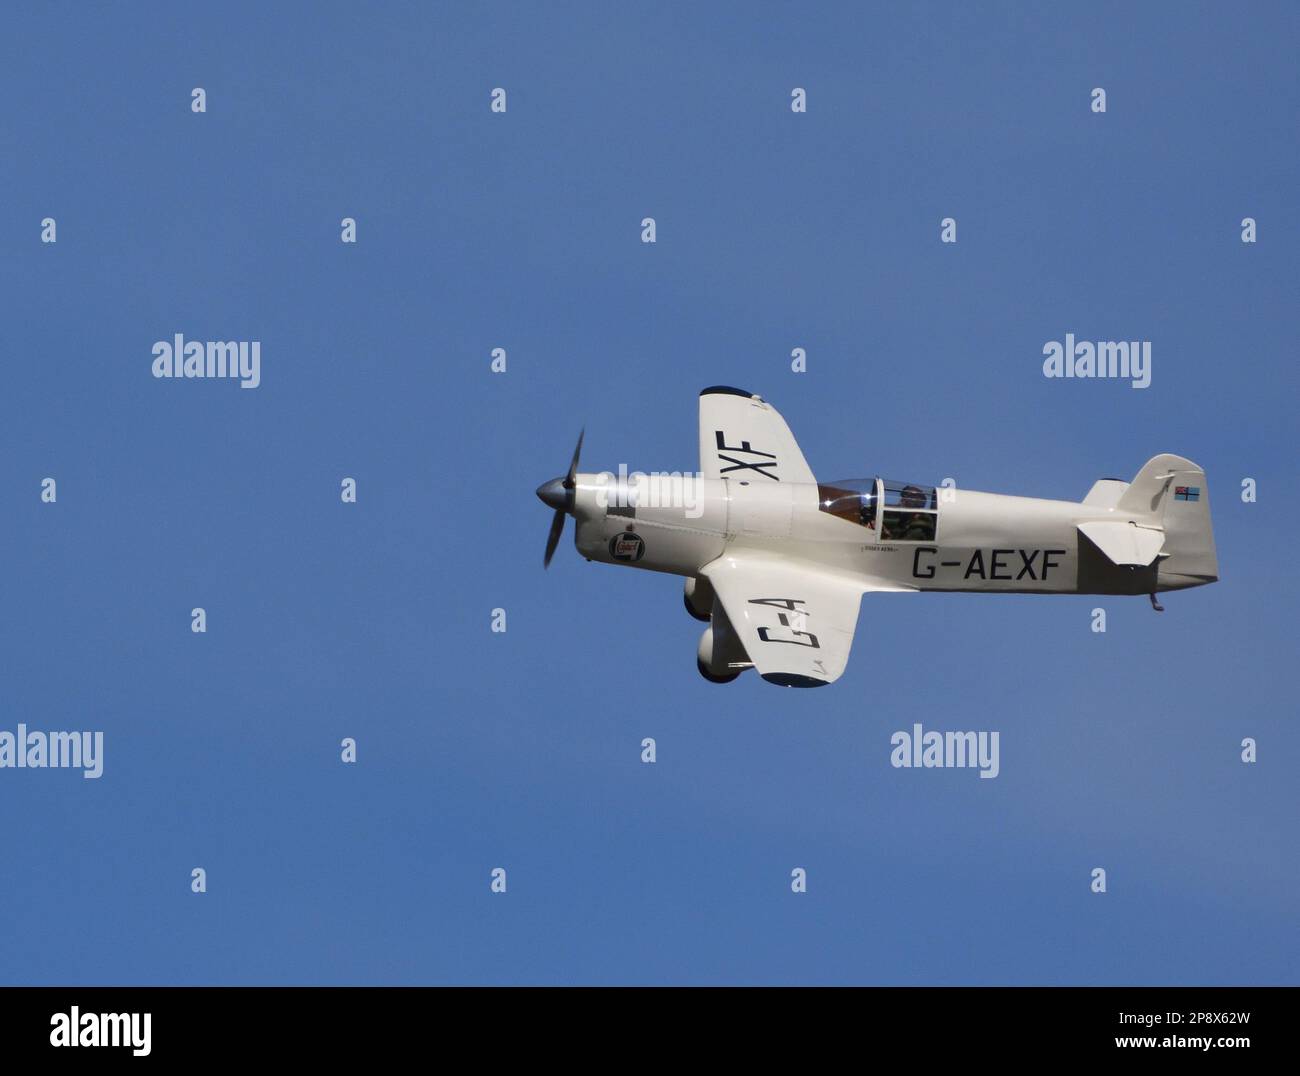 ICKWELL, BEDFORDSHIRE, ENGLAND - AUGUST 07, 2022: 1936 Percival Mew Gull  G-AEXF  Aircraft in flight with blue sky and clouds. Stock Photo